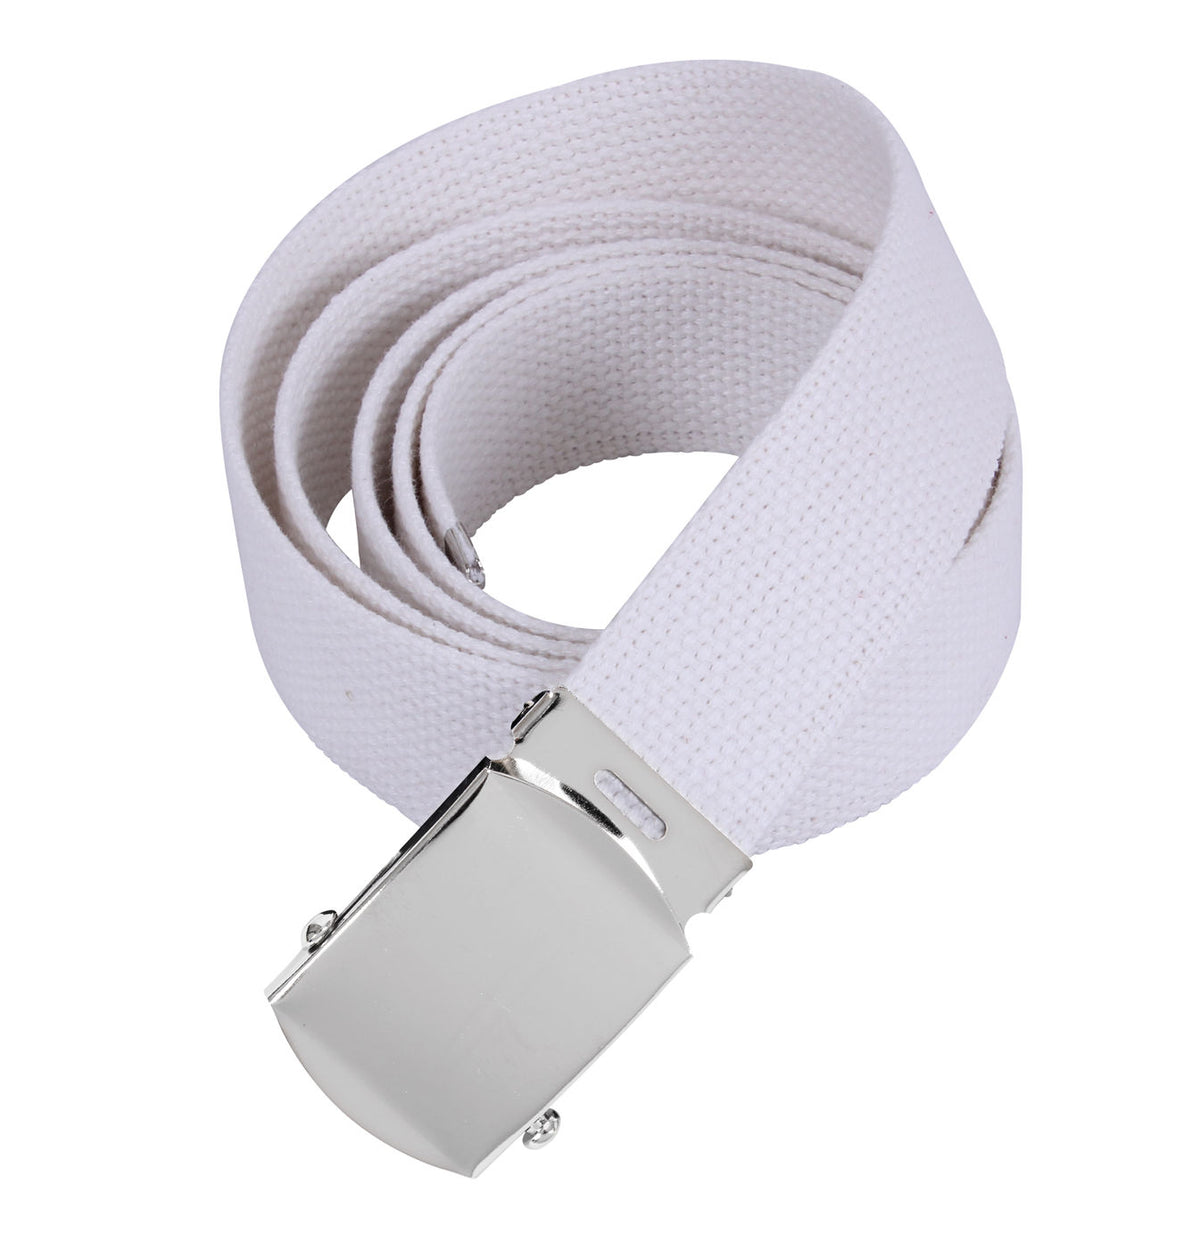 Rothco Military Web Belts with Buckle